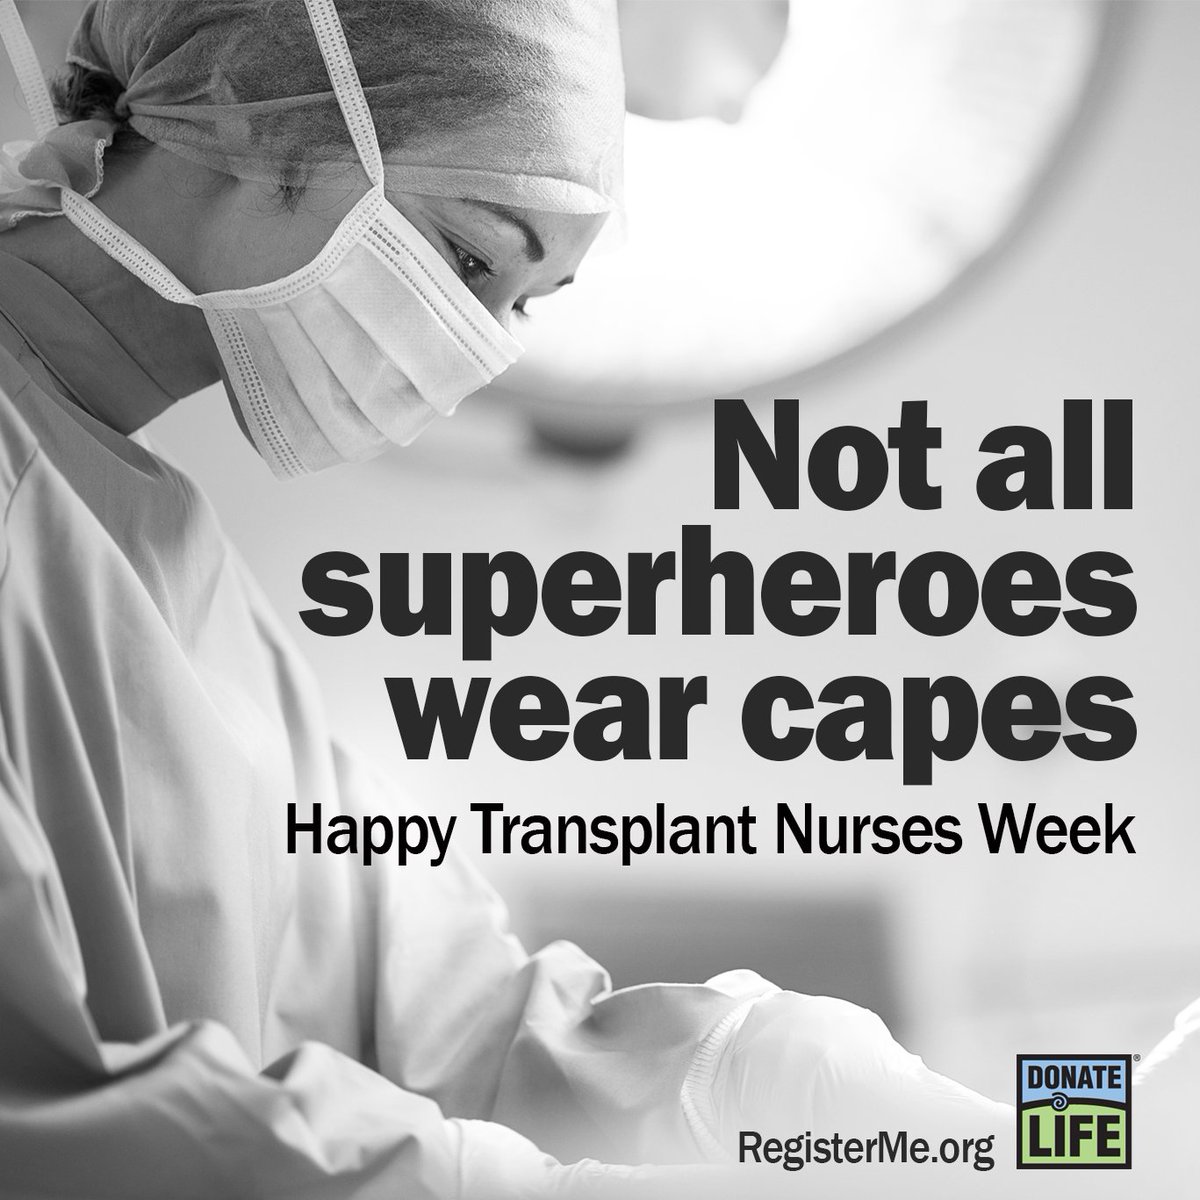 Not all superheroes wear capes. Shout out to the incredible transplant nurses in our community! Happy Transplant Nurses Week! 💙💚